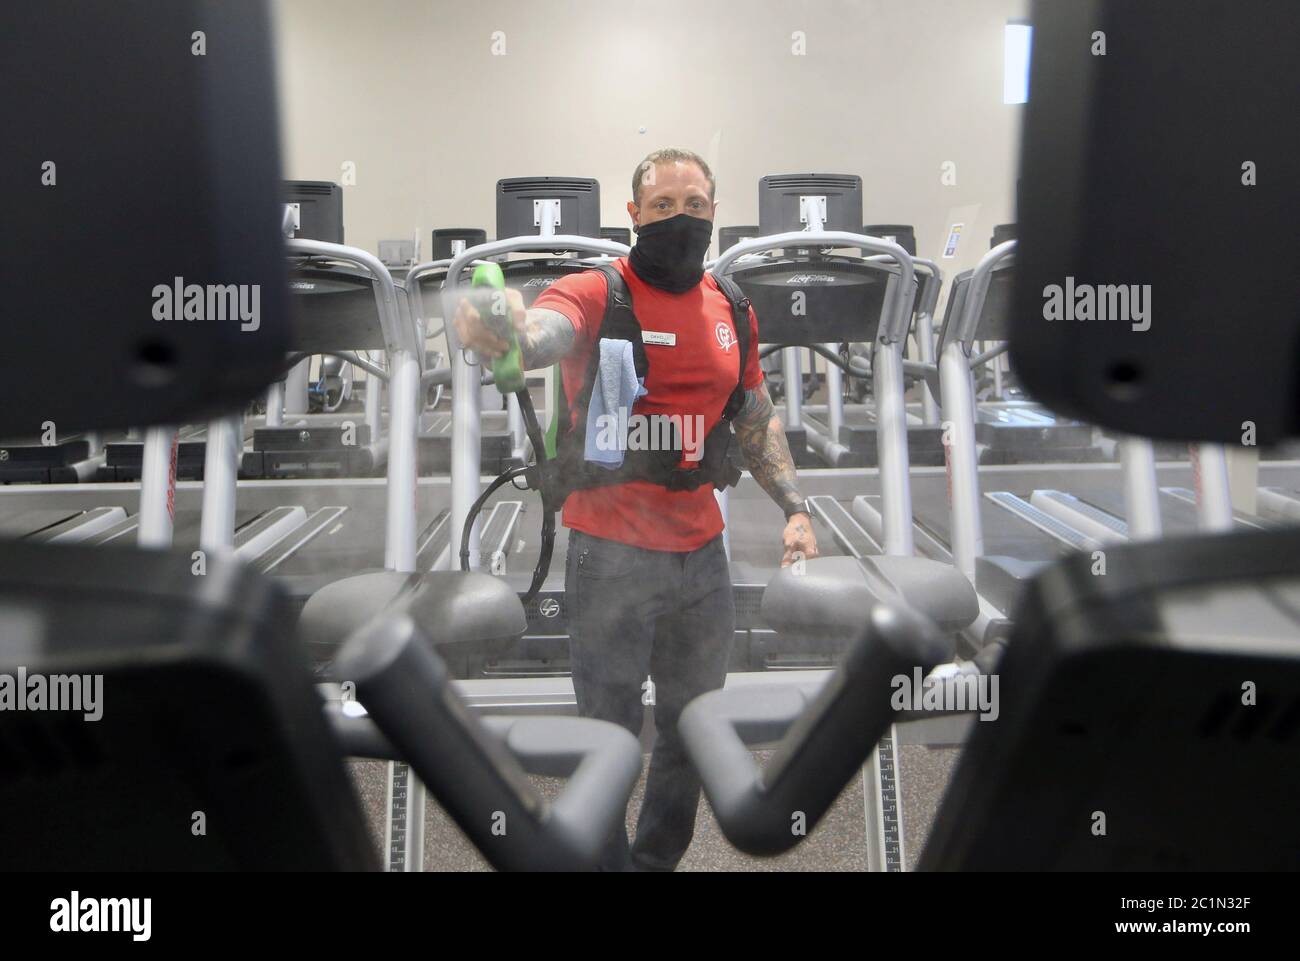 Maplewood United States 15th June Club Fitness Gym Employee David Watts Uses A Electro Magnetic Sprayer To Clean A Fitness Machine After Use On Day One Of Their Reopening In Maplewood